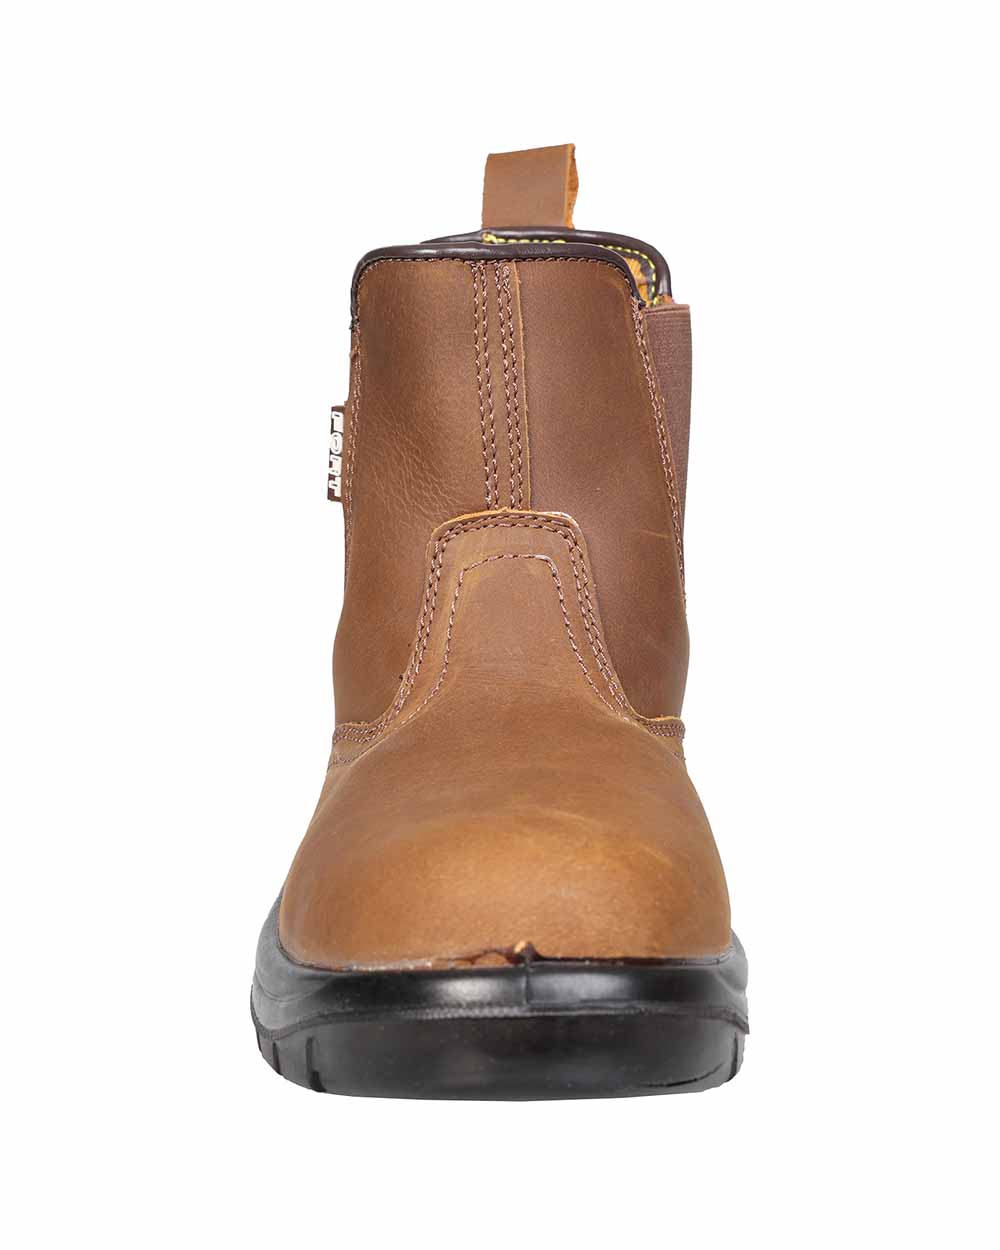 Brown Leather Toe cap view Fort Regent Safety Boot